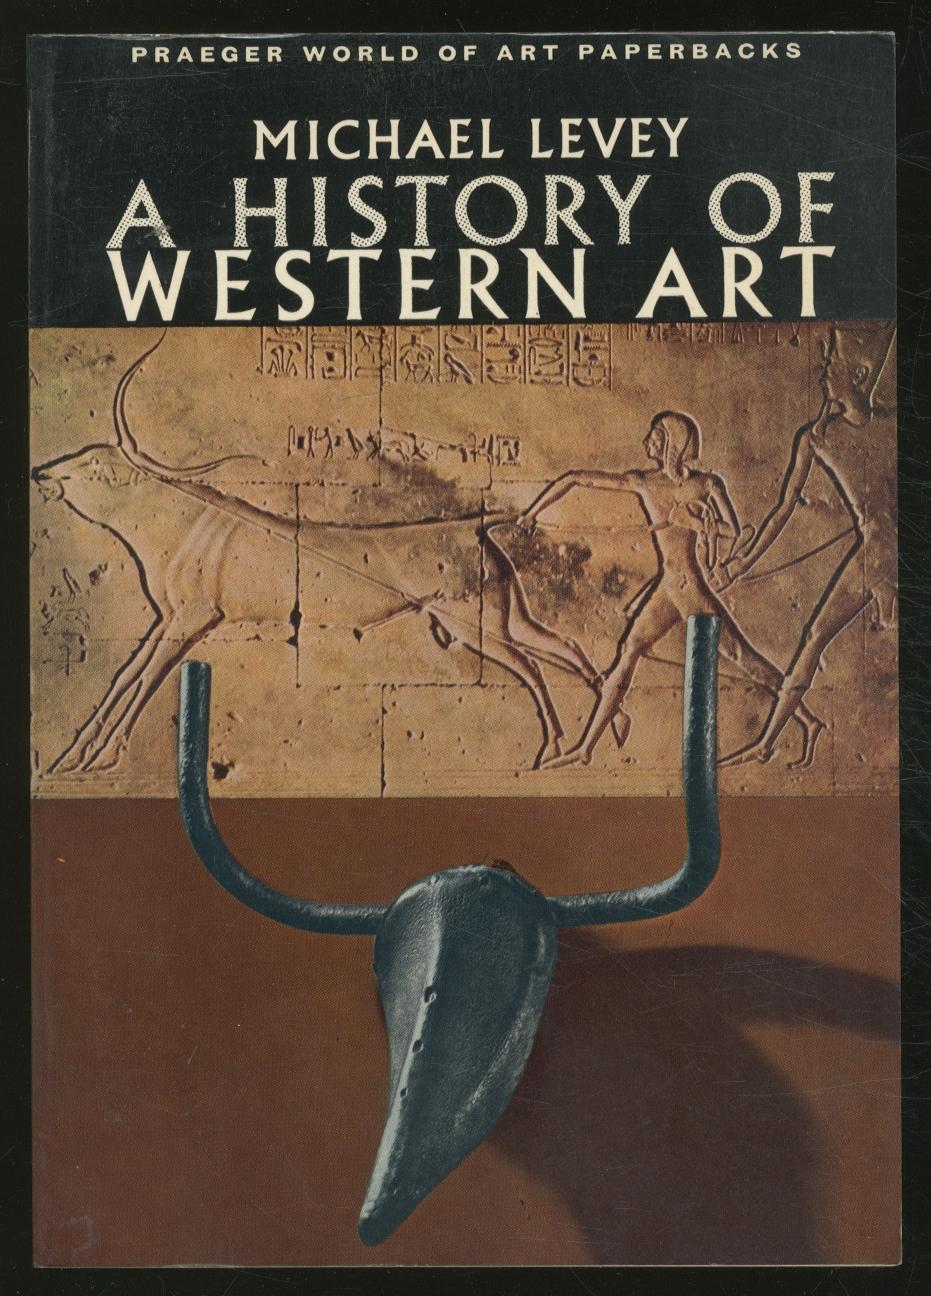 A History of Western Art by Michael Levey (image)